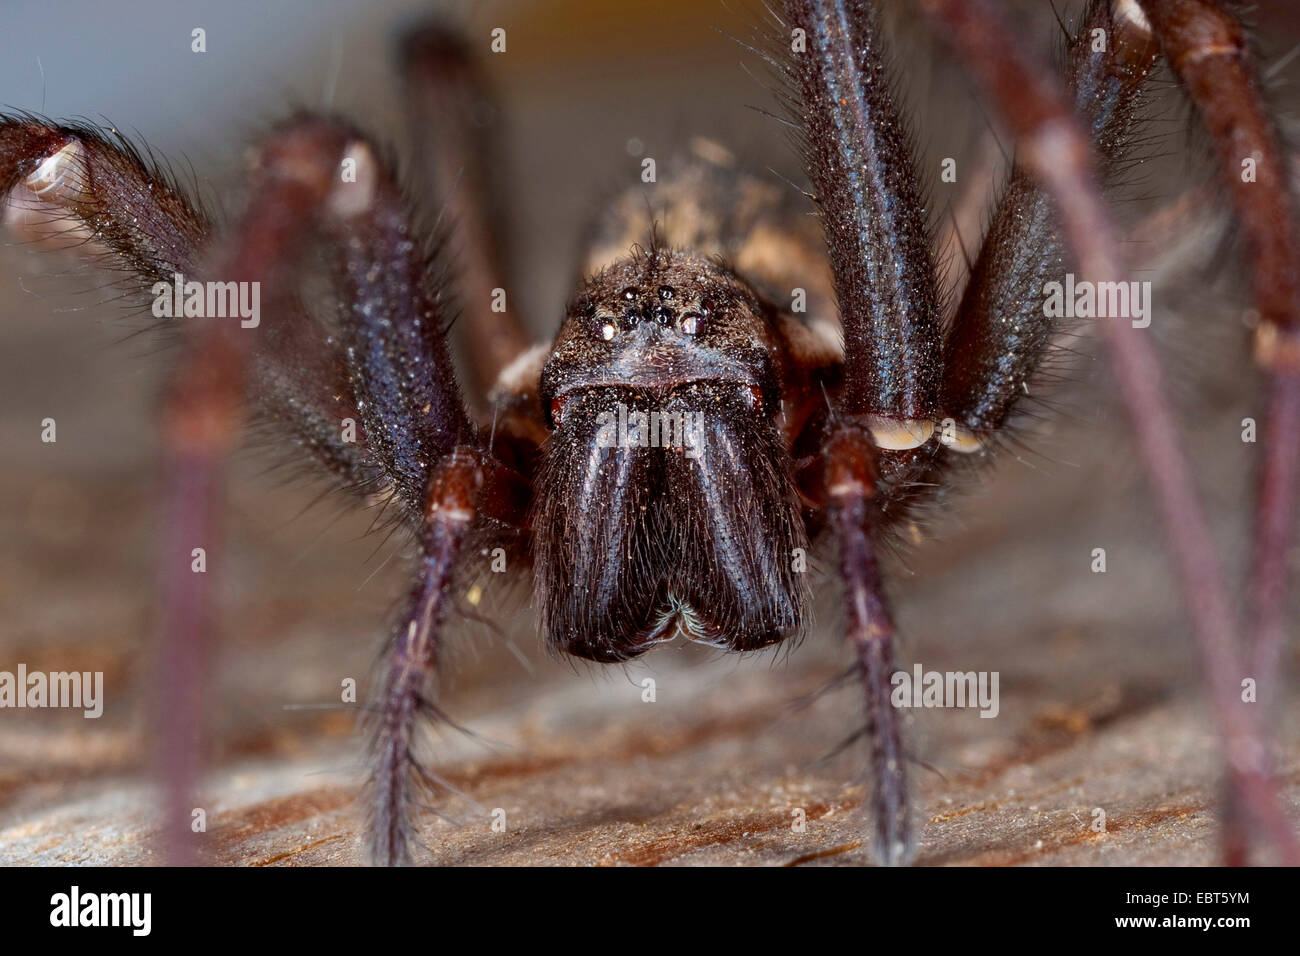 giant European house spider, giant house spider, larger house spider, cobweb spider (Tegenaria gigantea, Tegenaria atrica), female, portrait with 8 eyes and strong chelicera, Germany Stock Photo